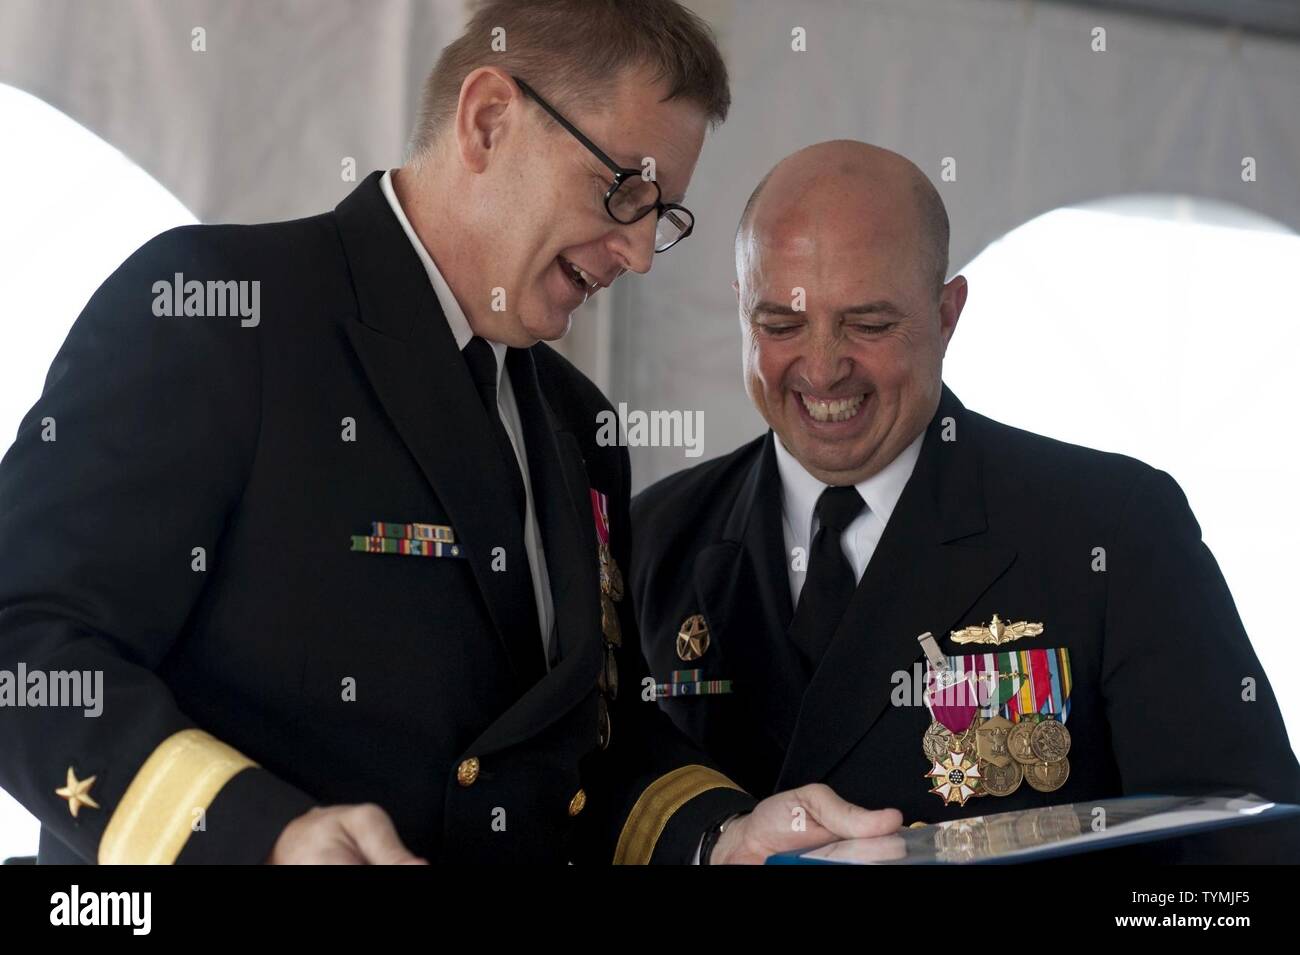 NORFOLK, Va. (November 16, 2016)  Rear Adm. Brian Luther shares a laugh with Capt. Juan J. Orozco, former commanding officer of the guided-missile cruiser USS Leyte Gulf (CG 55), after awarding him the Legion of Merit in recognition of his service. Capt. Daniel D. Sunvold relieved Orozco as the commanding officer in a ceremony held aboard on the ship's fantail. Stock Photo